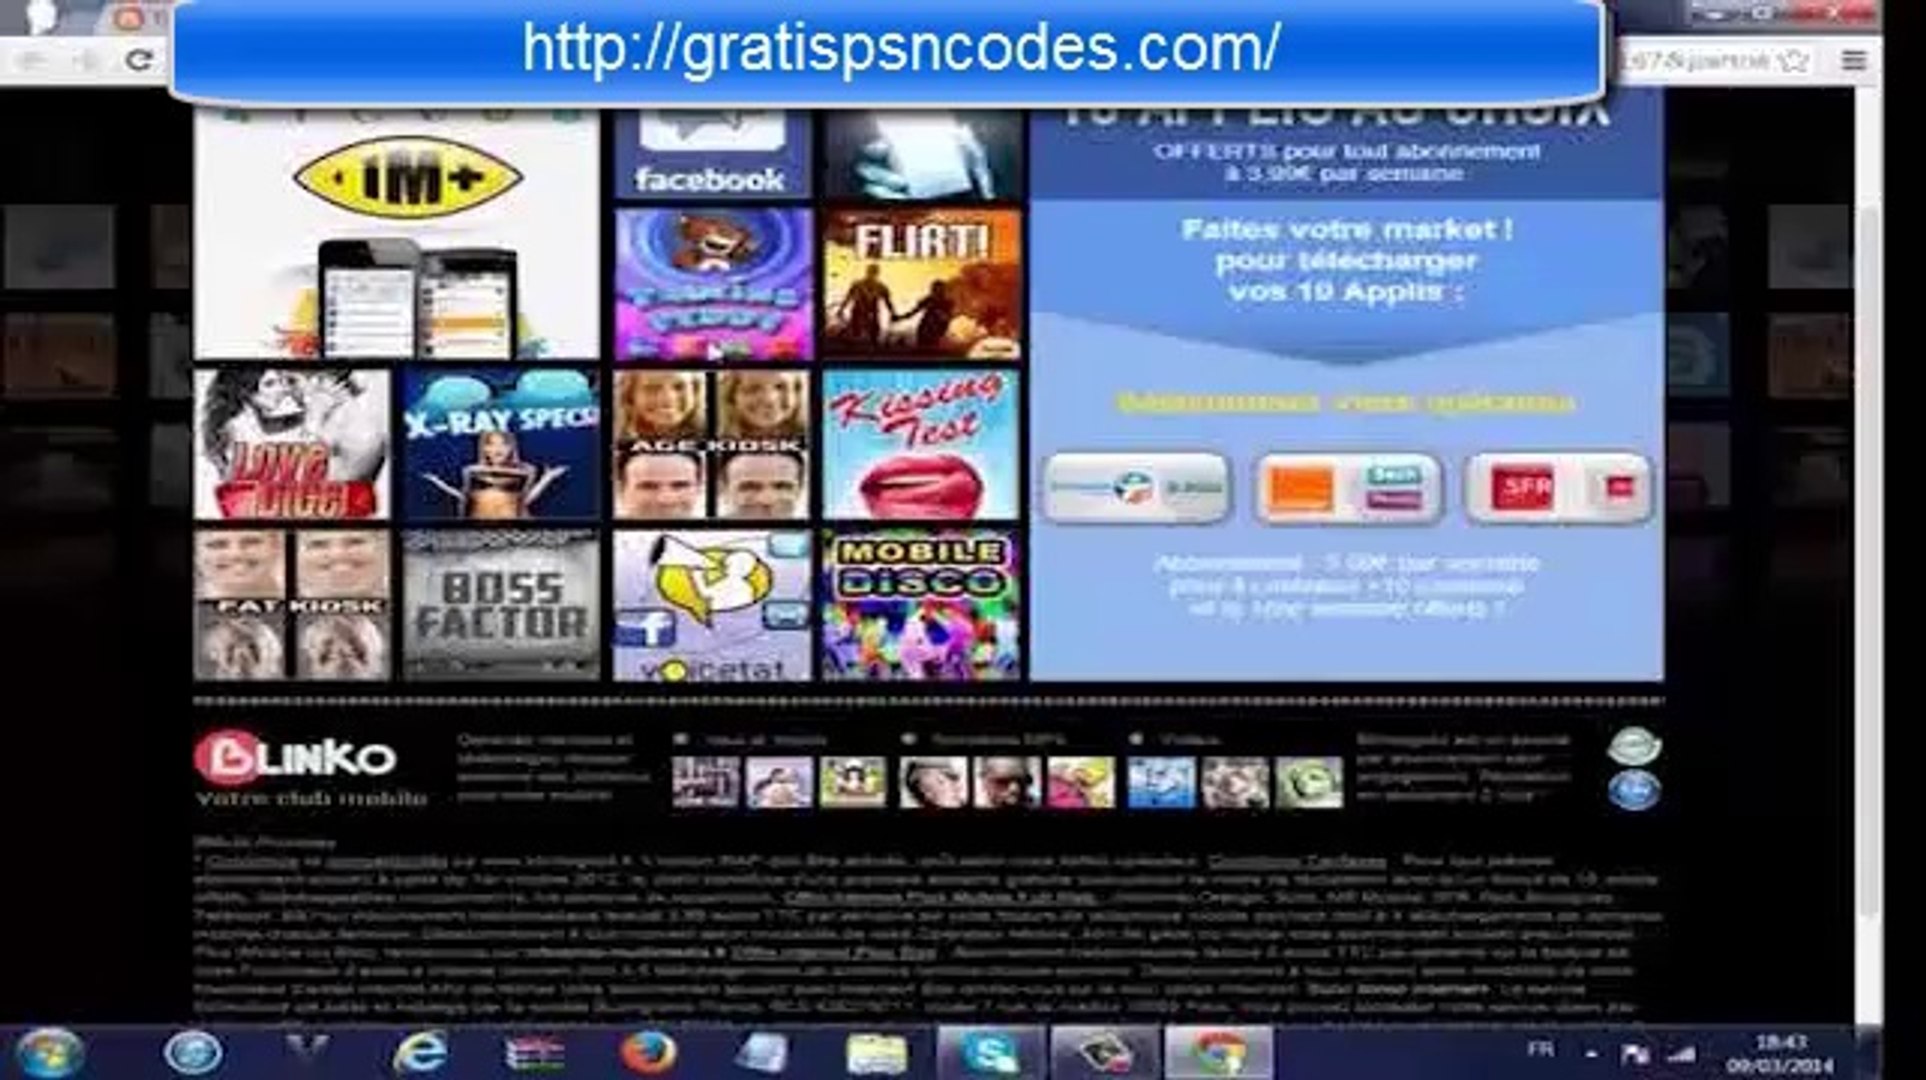 ps3 network card - Gratis psn codes - Germany / France / Switzerland -  video Dailymotion